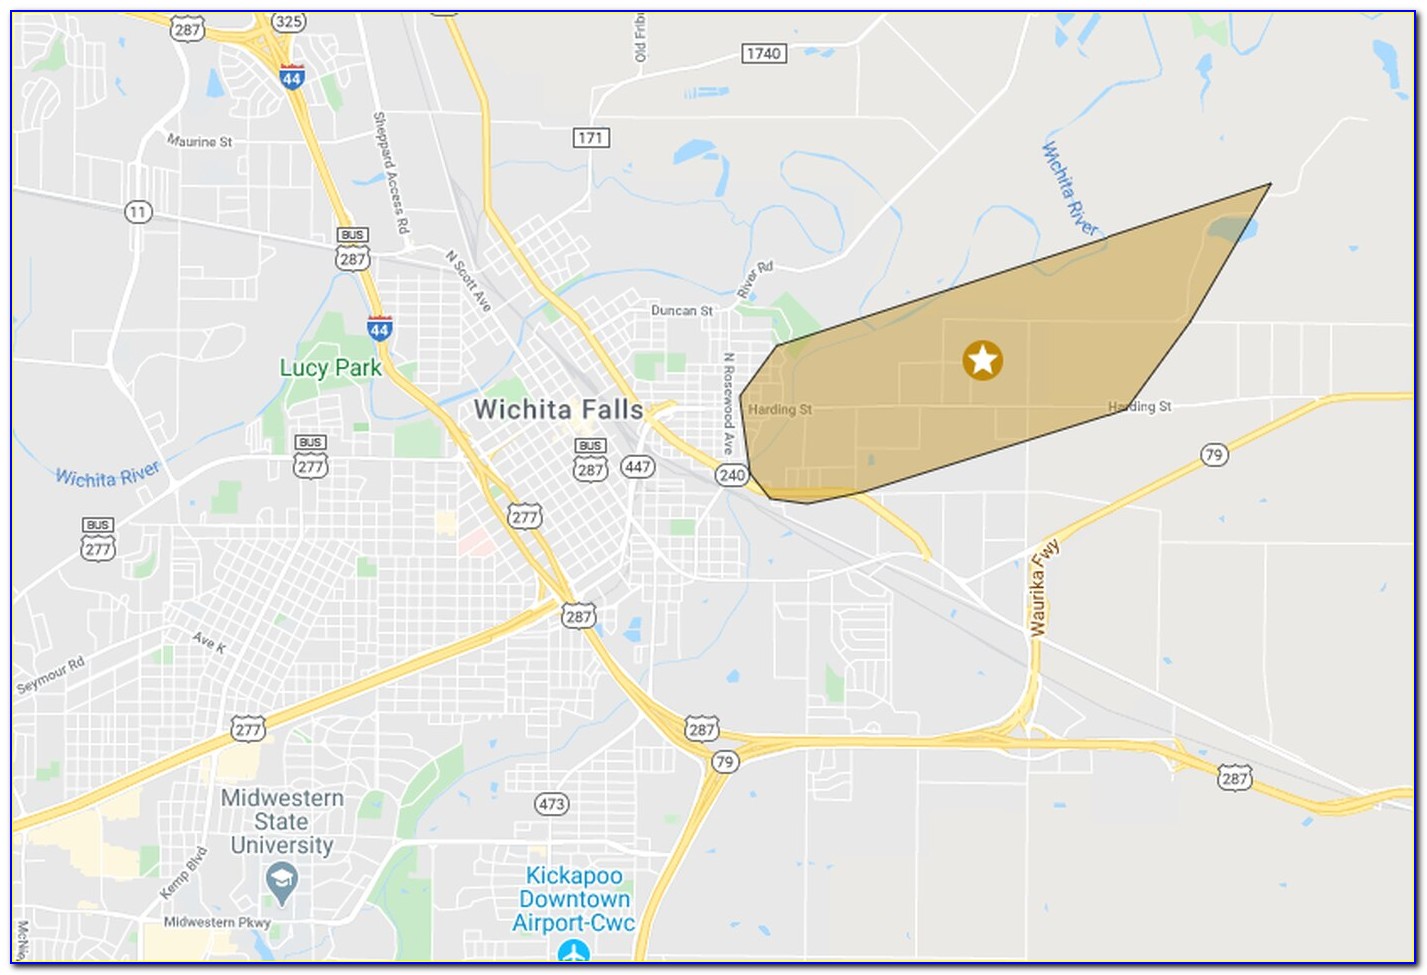 Oncor Power Outage Map Tarrant County